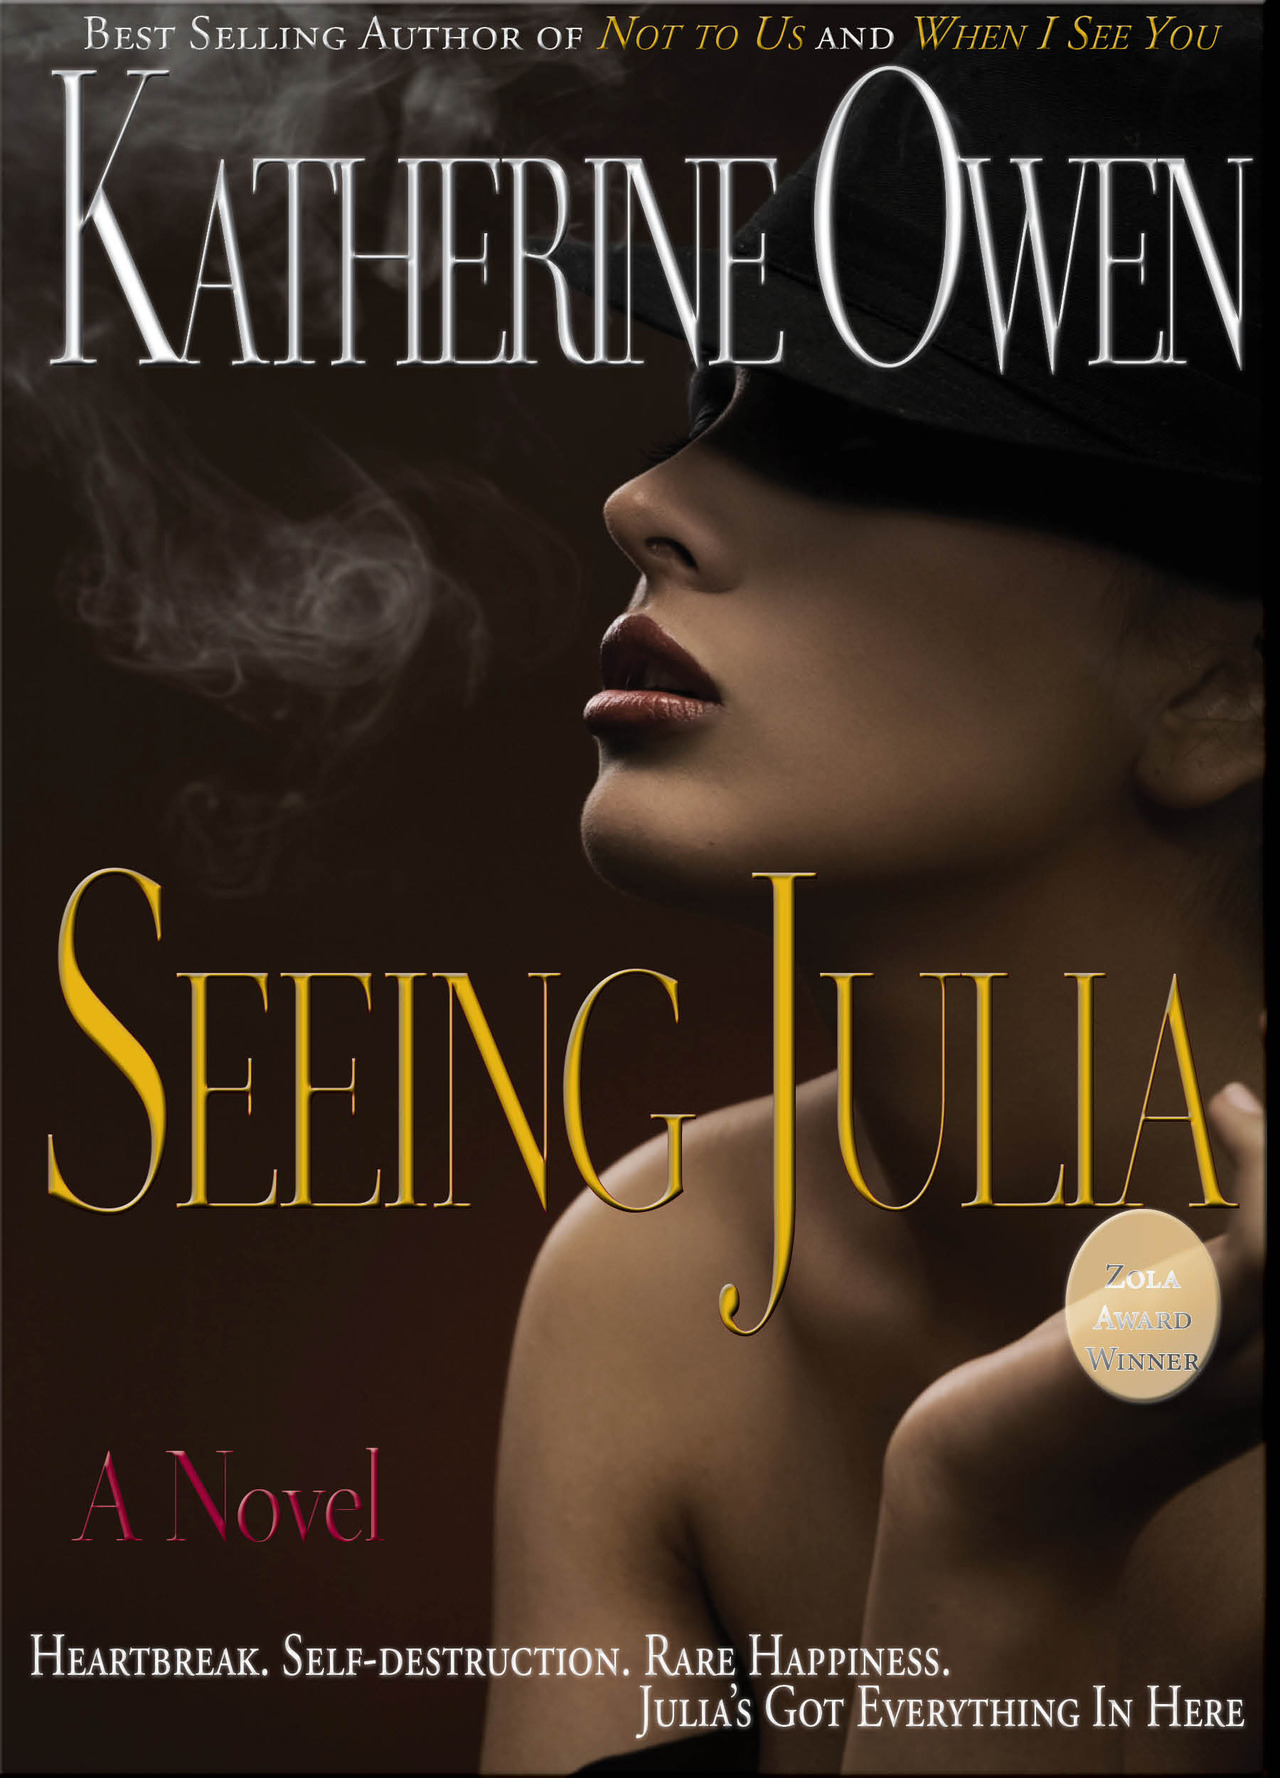 It’s New! Book Cover UPDATE for novel SEEING JULIA